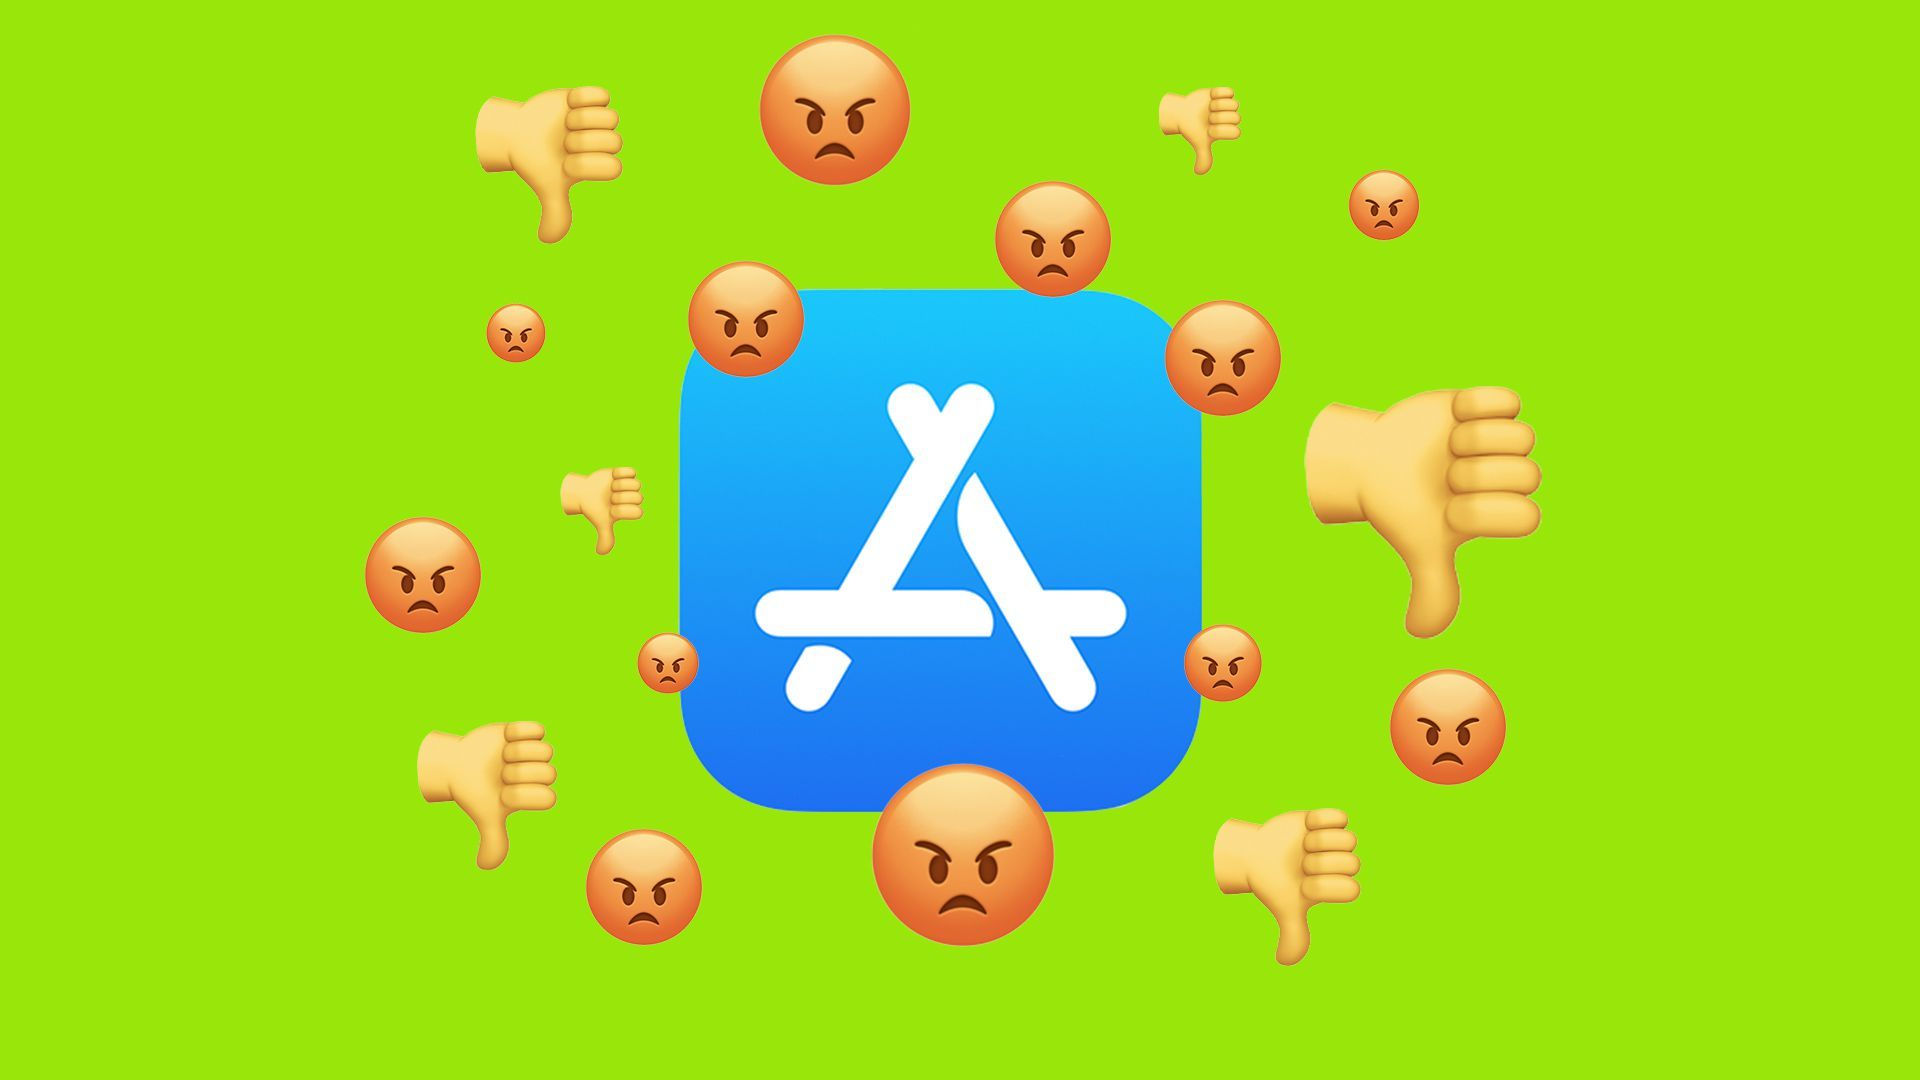 Illustration of the App Store logo surrounded by angry face emojis and thumbs down emojis. 